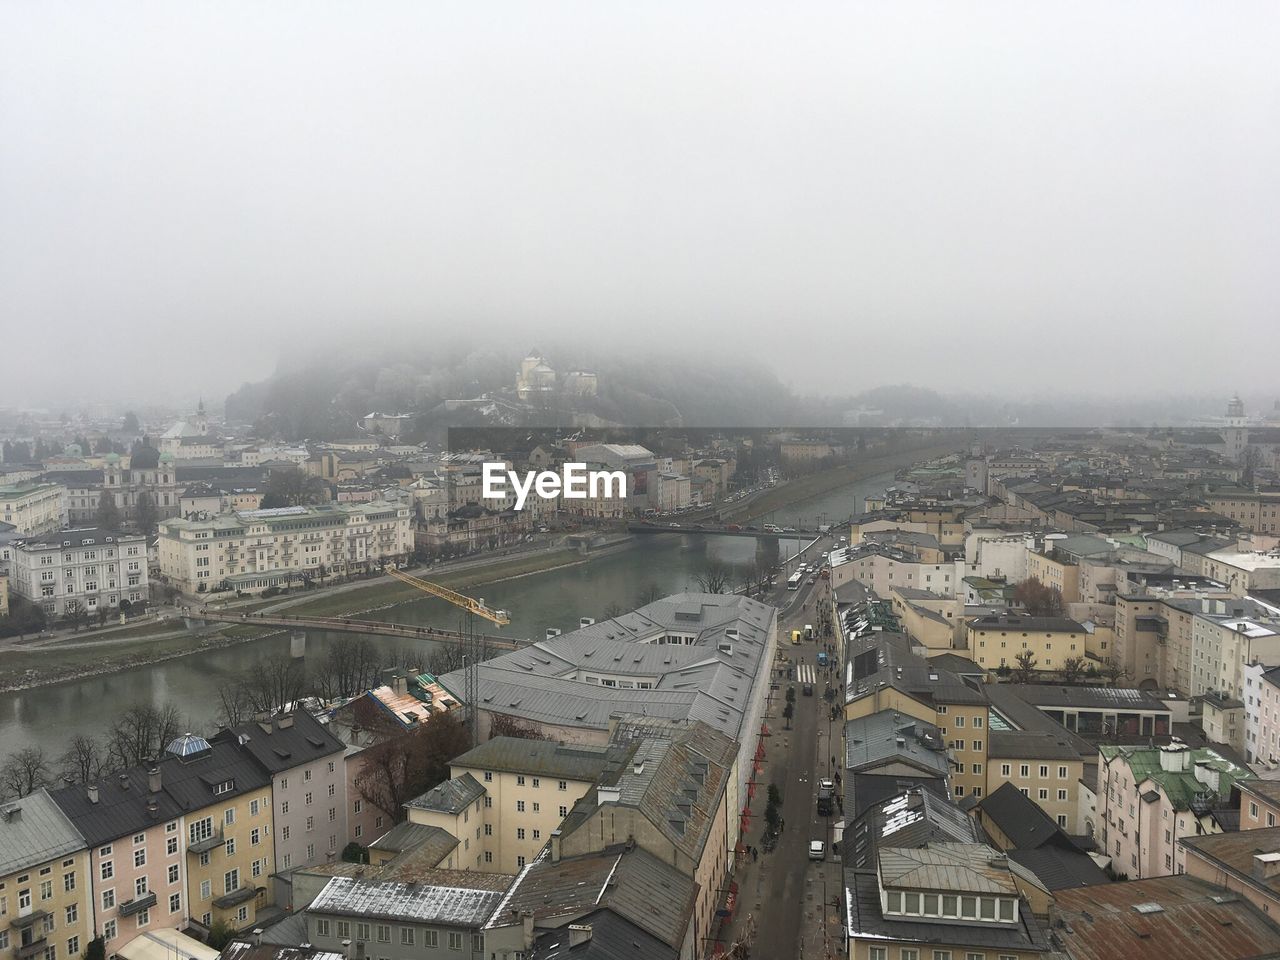 HIGH ANGLE VIEW OF CITY IN FOGGY WEATHER